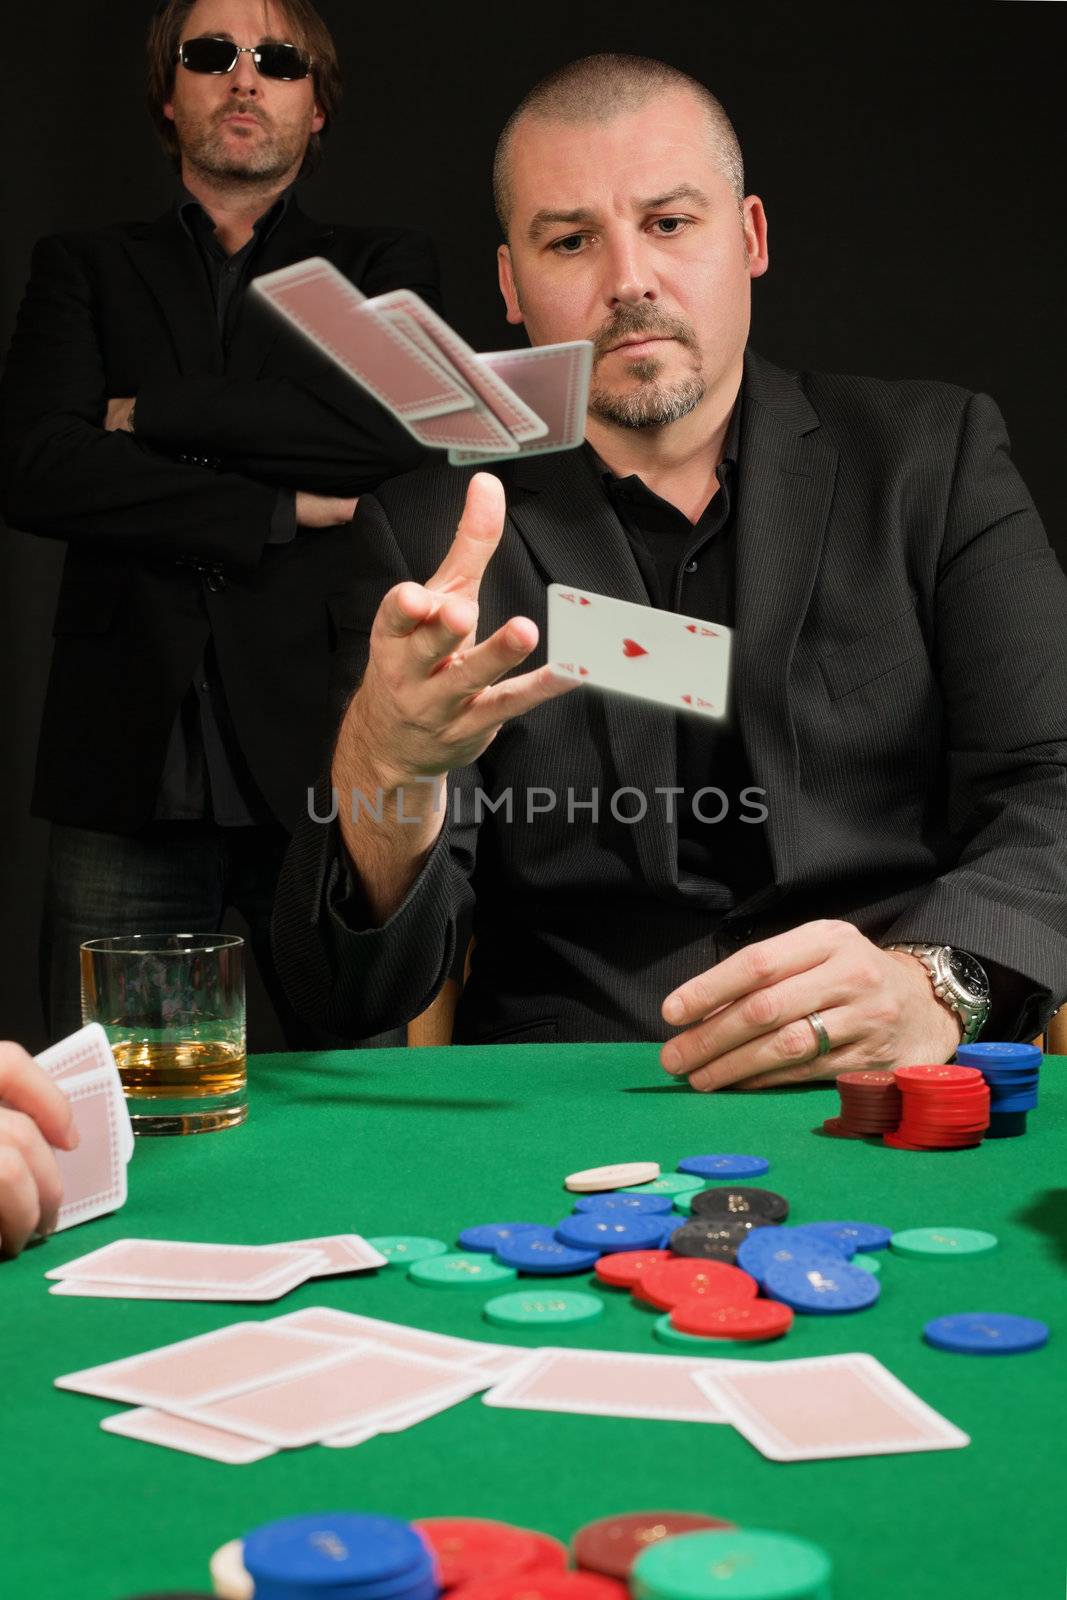 Photo of a poker player throwing in his cards.